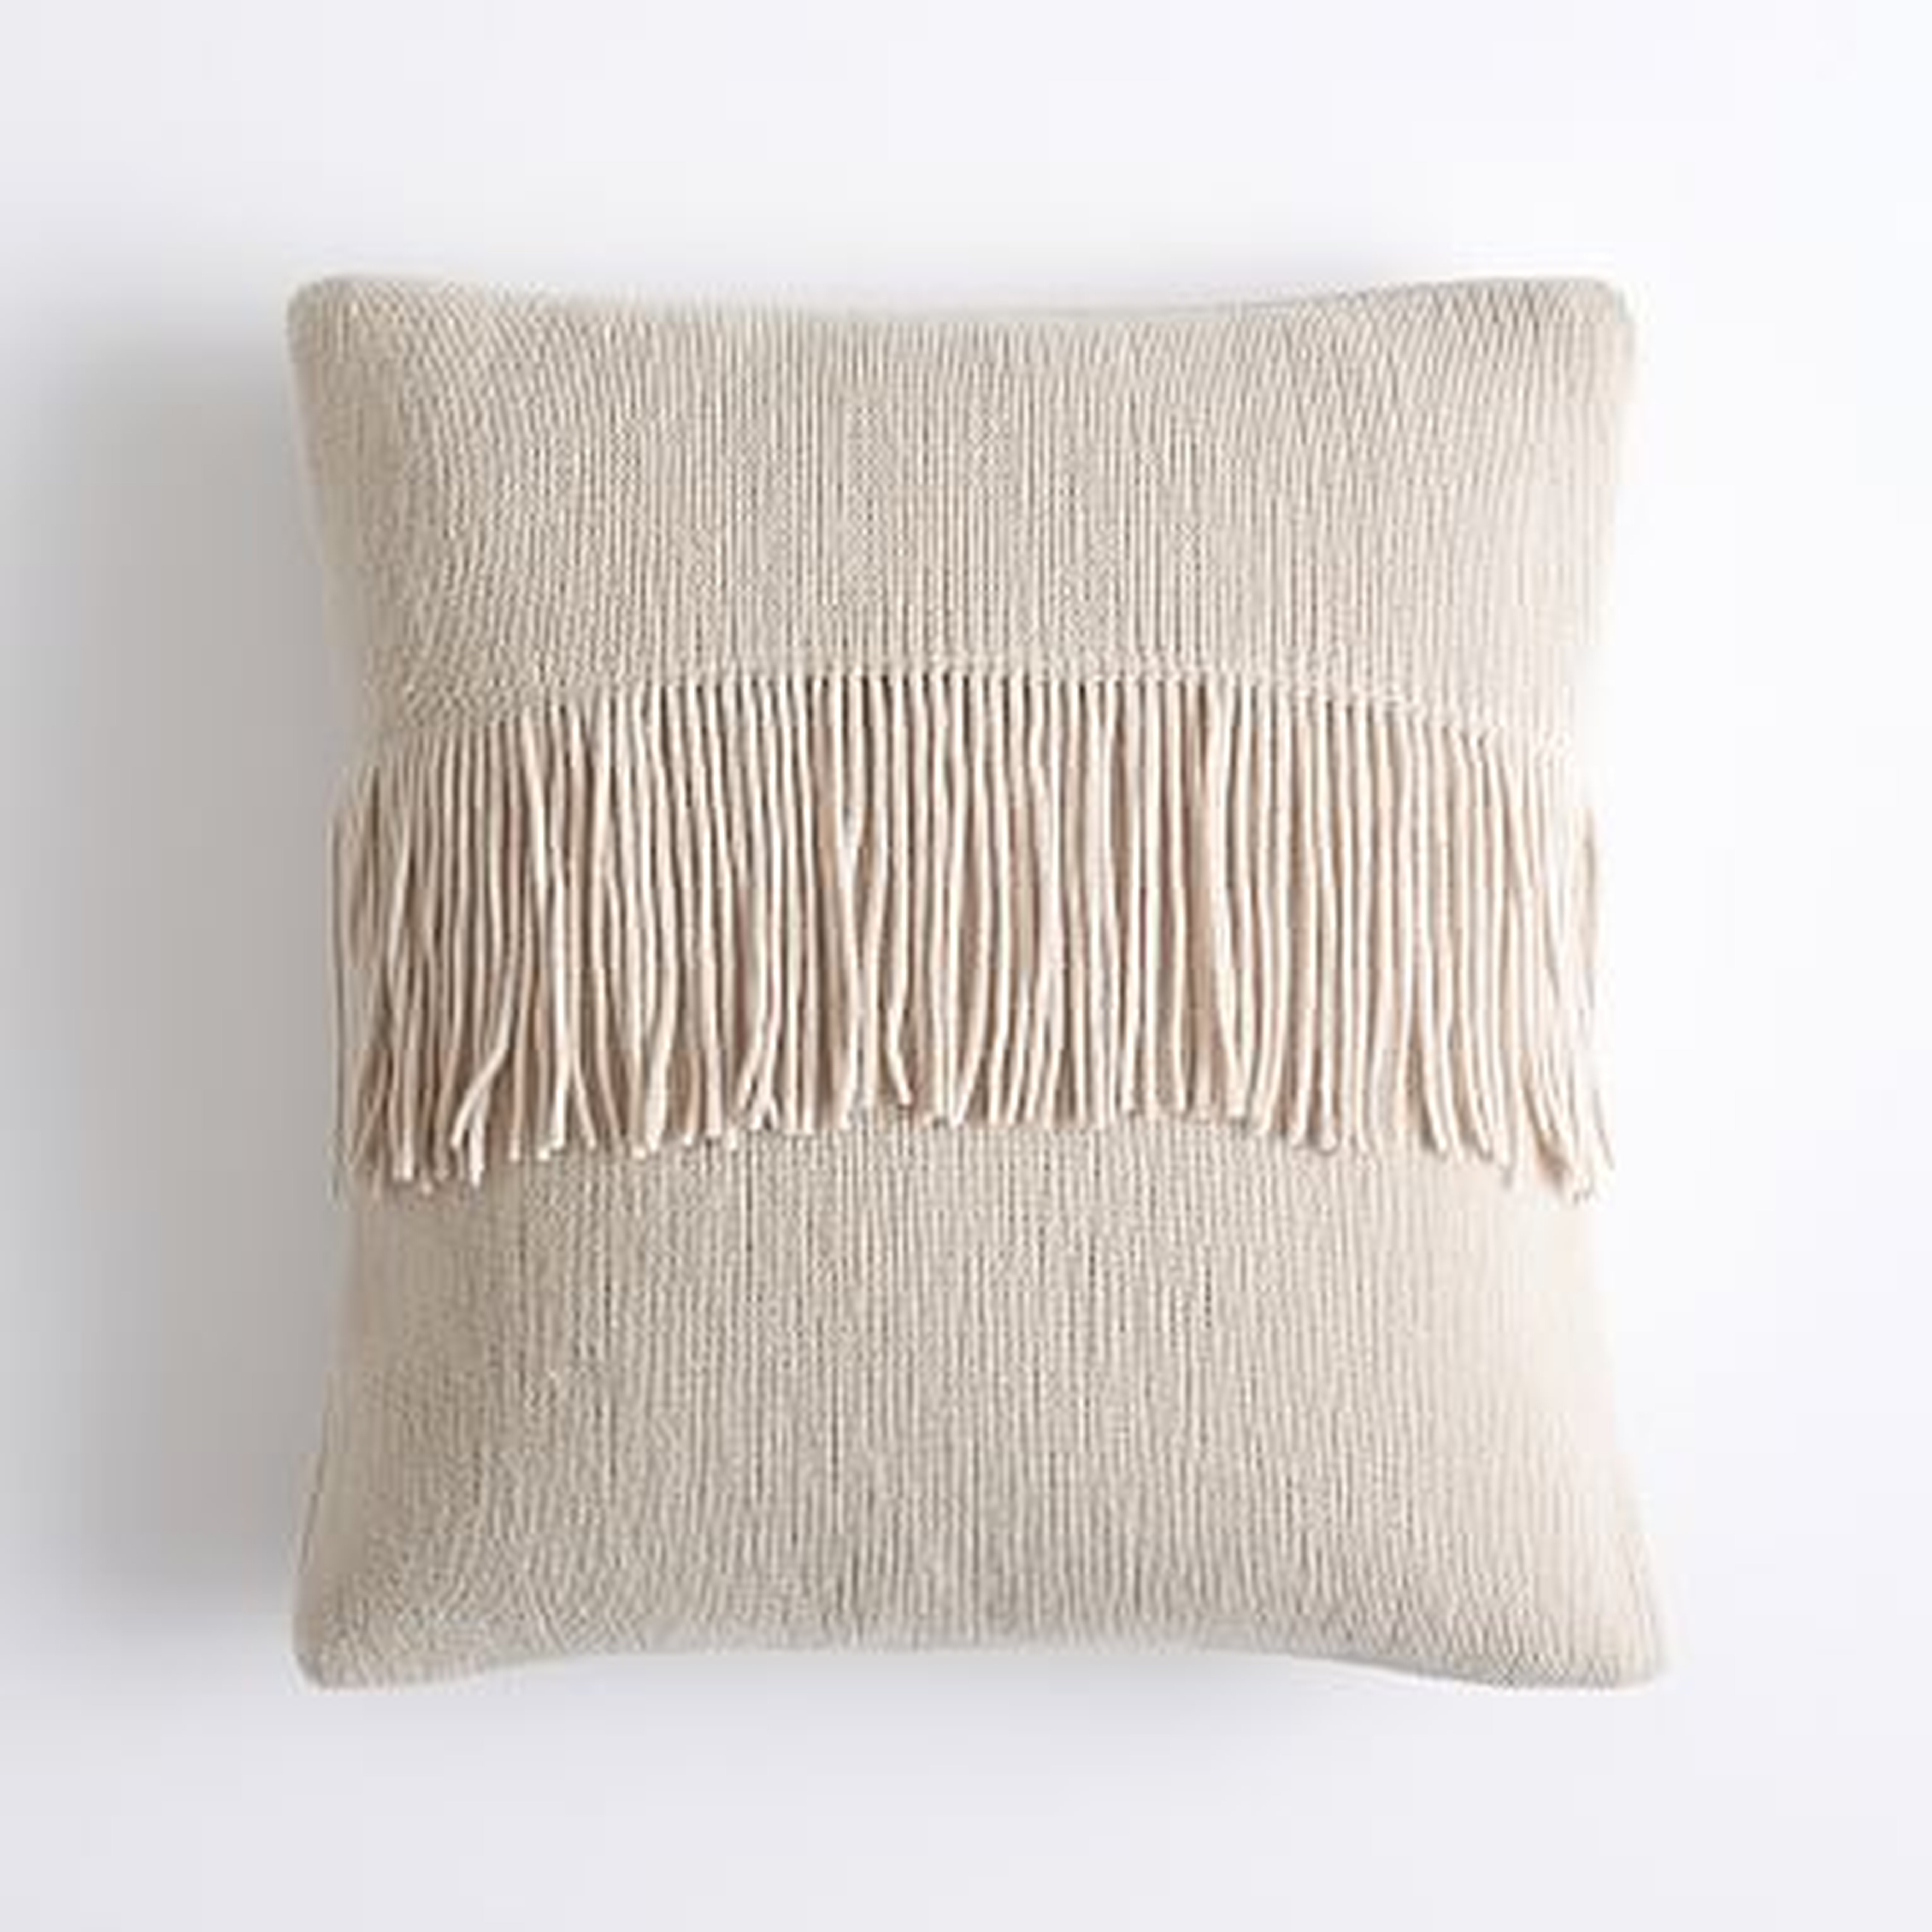 Chic Fringe Pillow Cover, 16x16, Vintage Ivory - Pottery Barn Teen